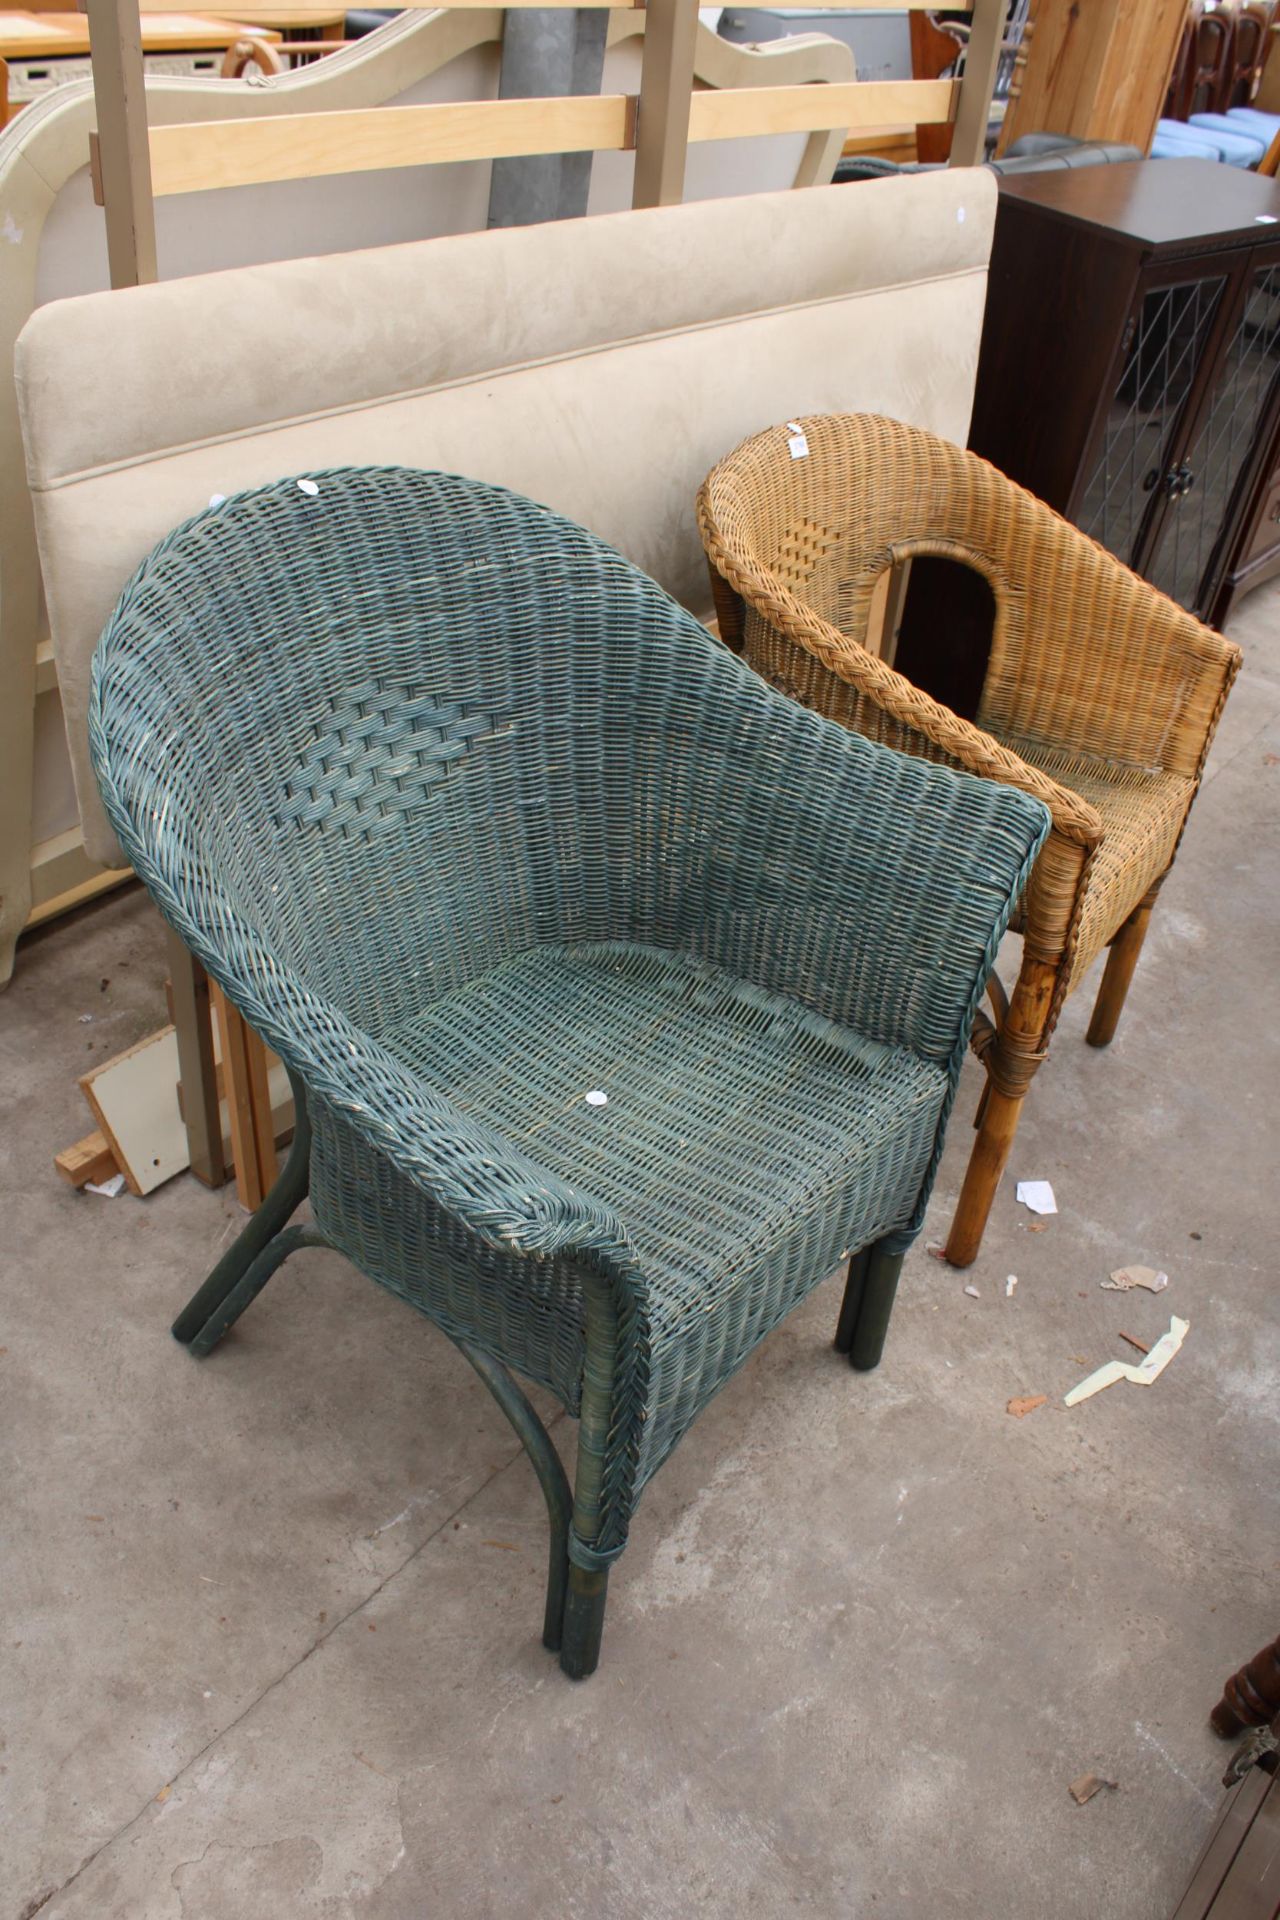 TWO WICKER CONSERVATORY CHAIRS AND 5' HEADBOARD - Image 3 of 3